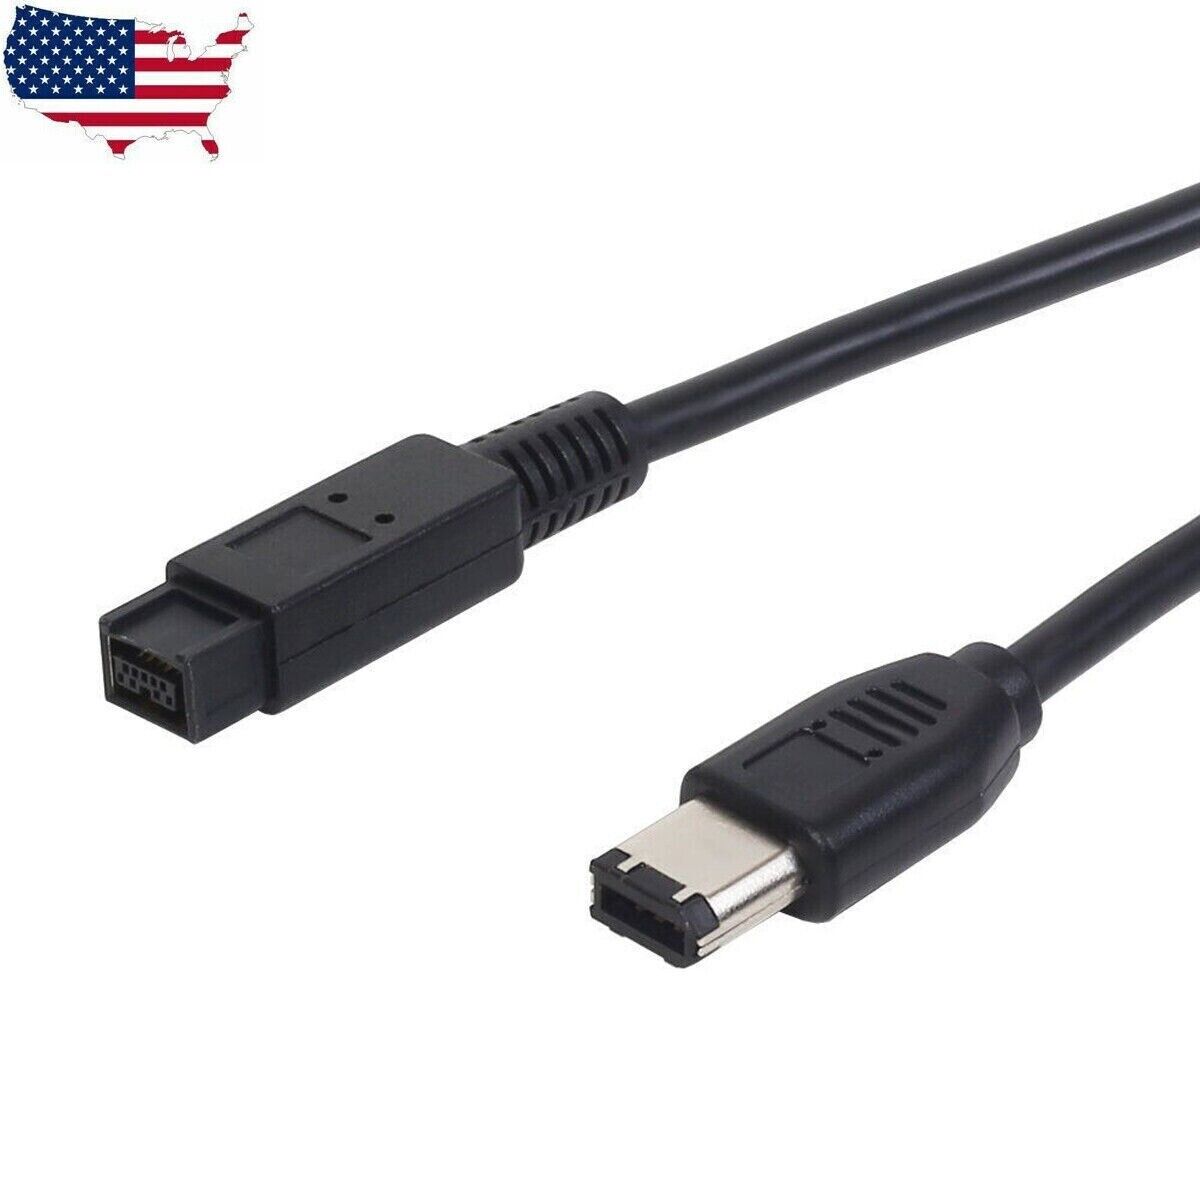 5Ft 9-Pin to 6-Pin FireWire 800/400 Cable IEEE-1394b (3 Feet) IE9496-3